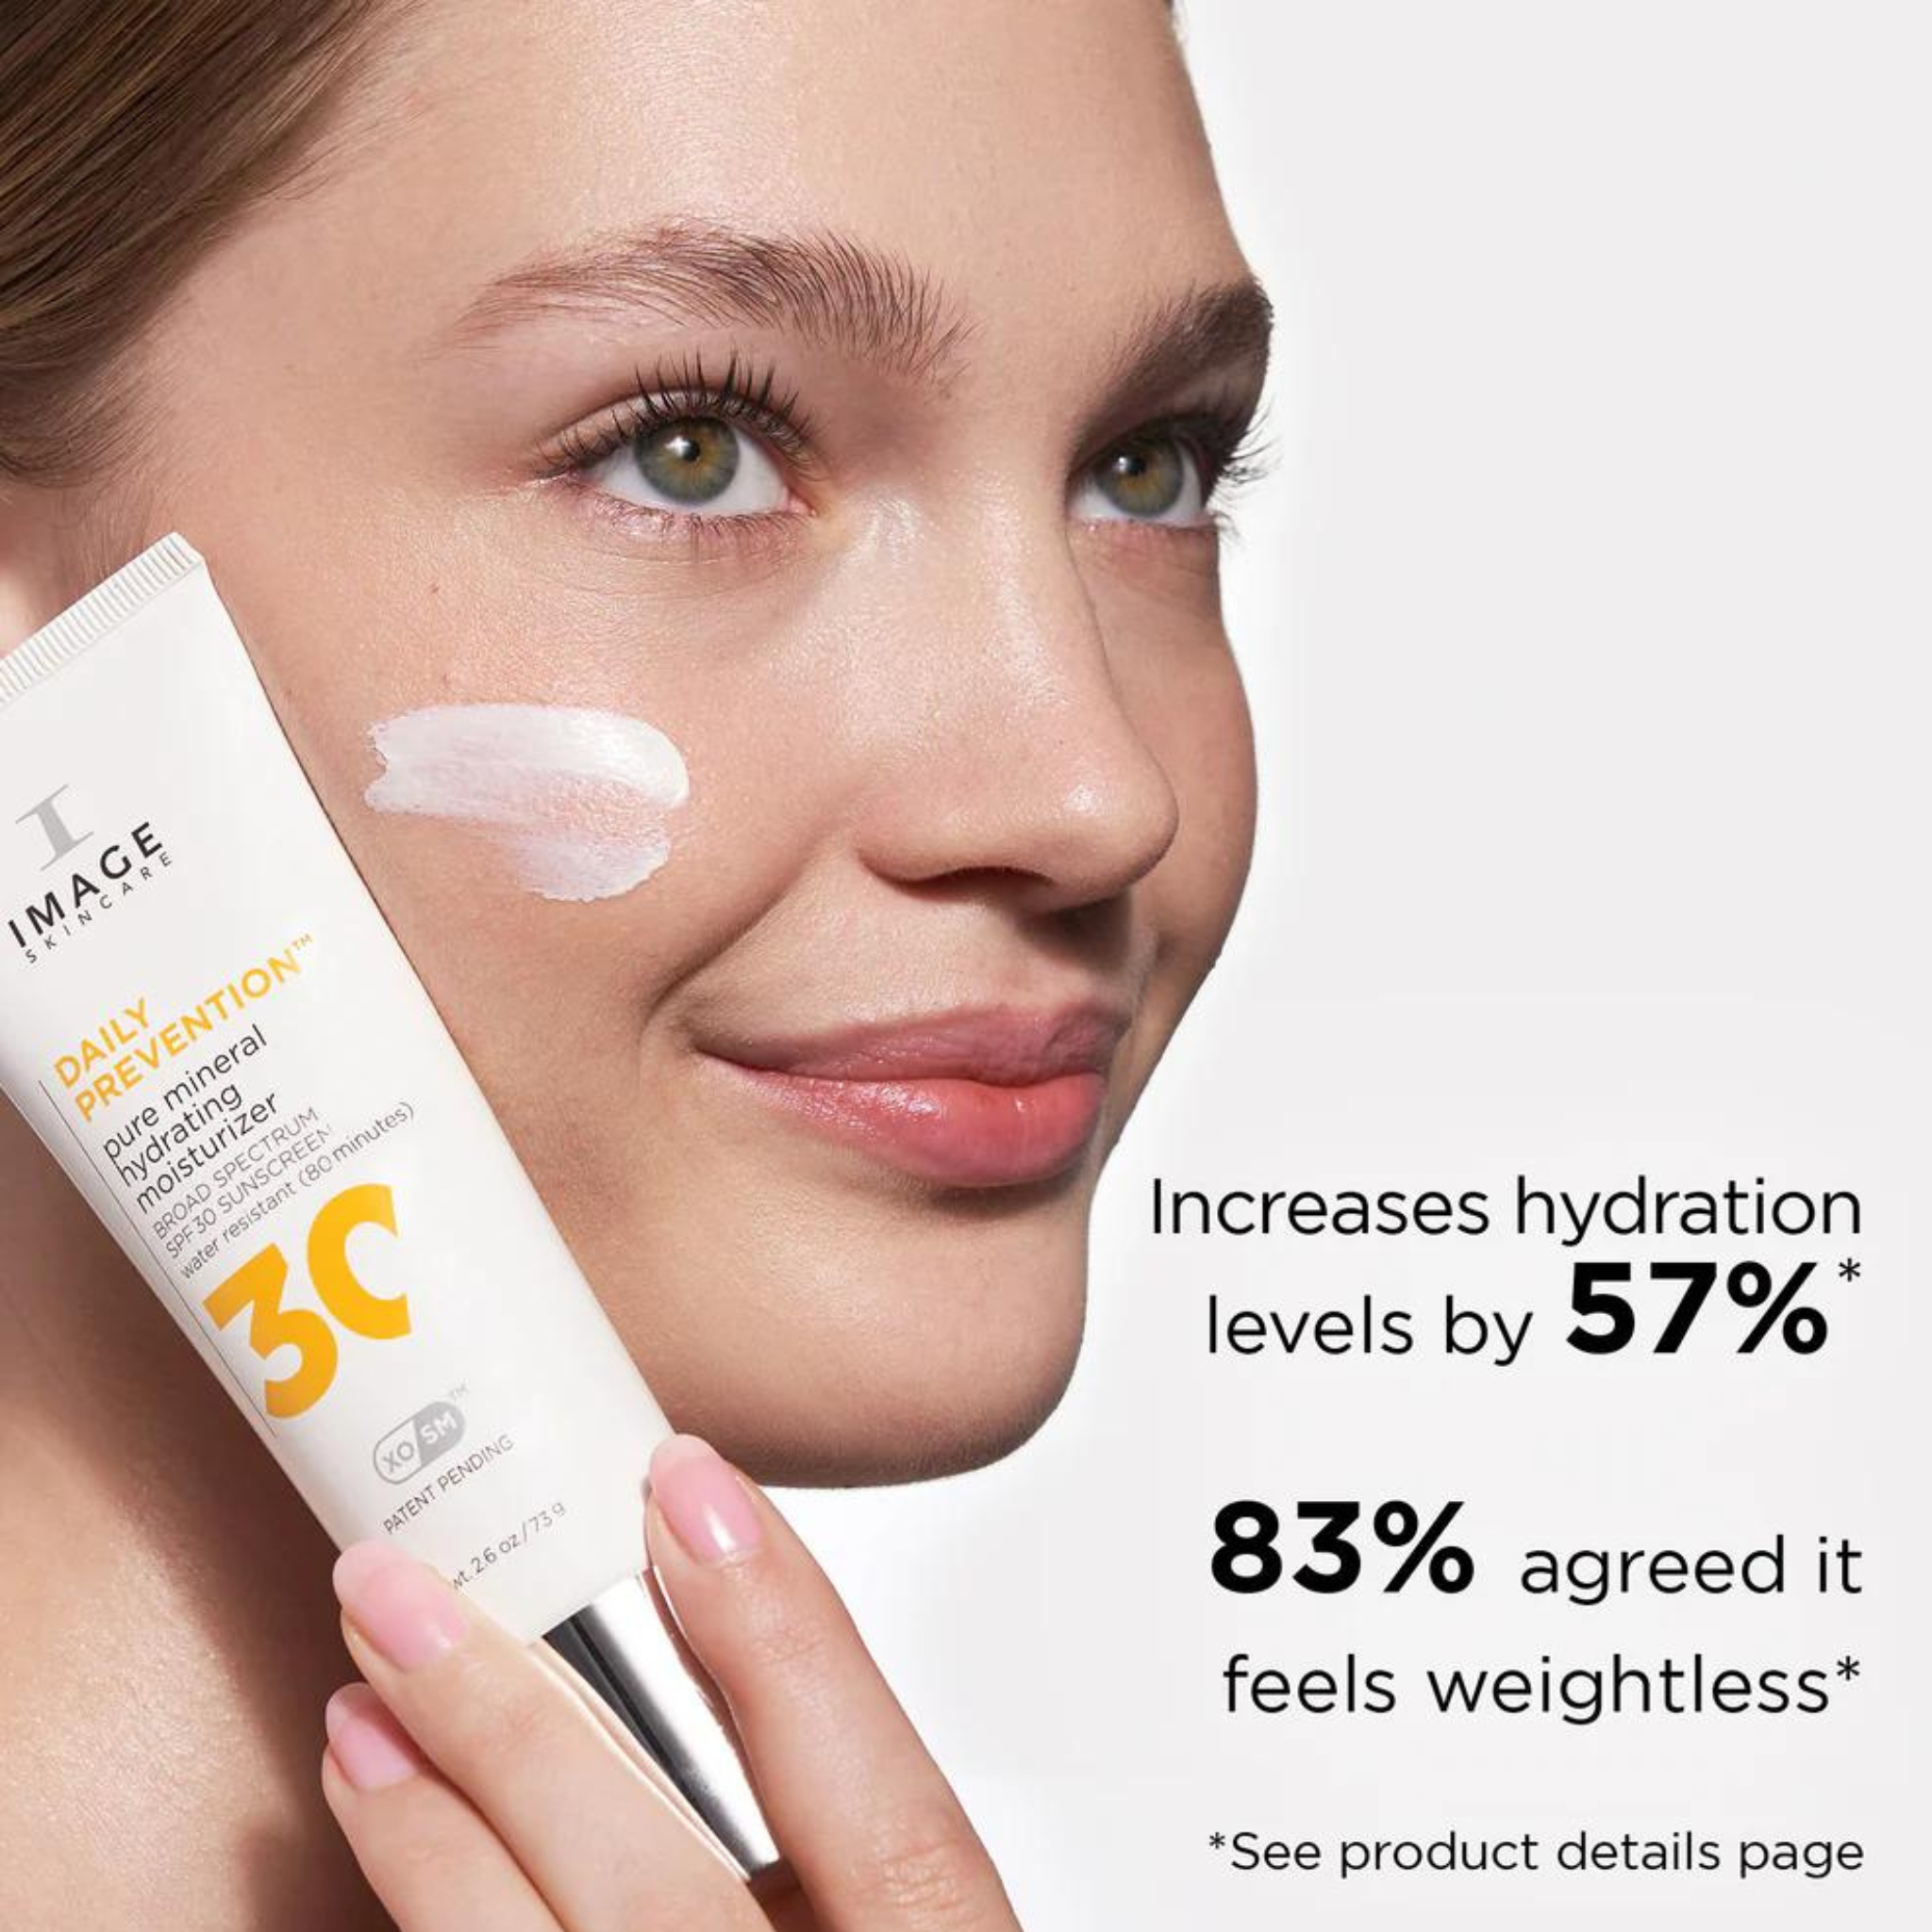 DAILY PREVENTION Pure Mineral Hydrating Moisturiser SPF30 Benefits